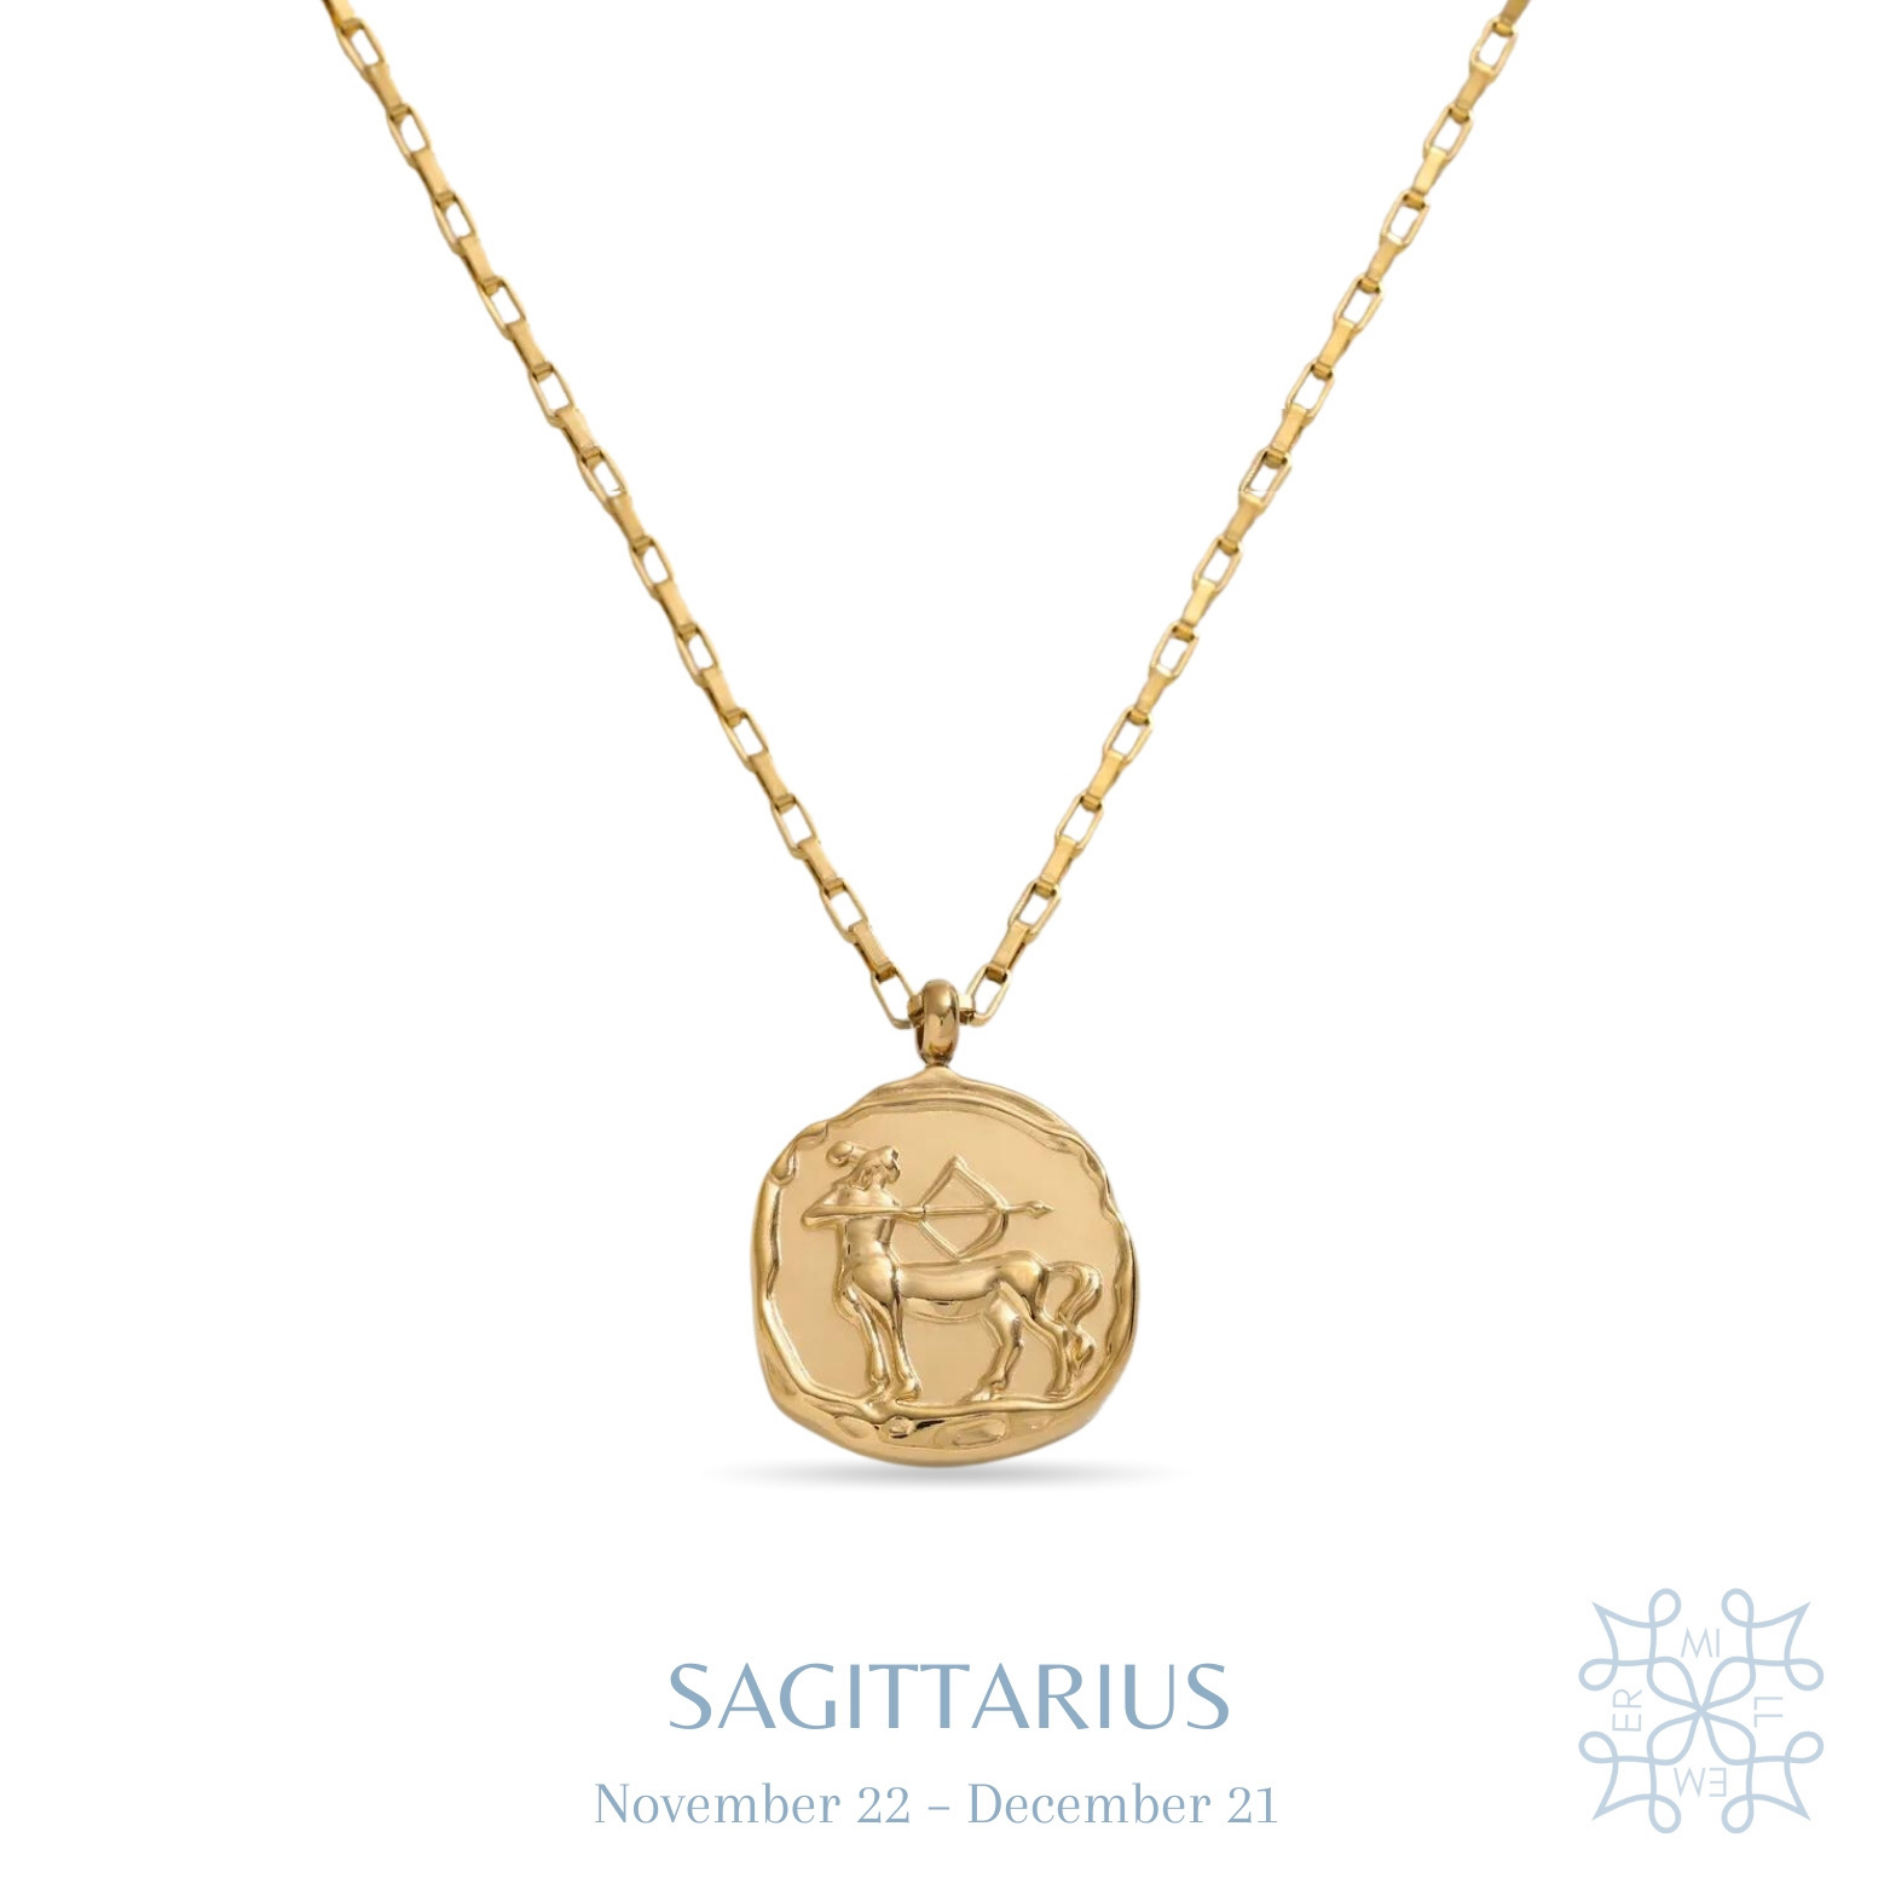 Irregular shape round medallion with Sagittarius symbol in the middle. Gold plated chain and medallion necklace. Sagittarius medallion gold necklace.